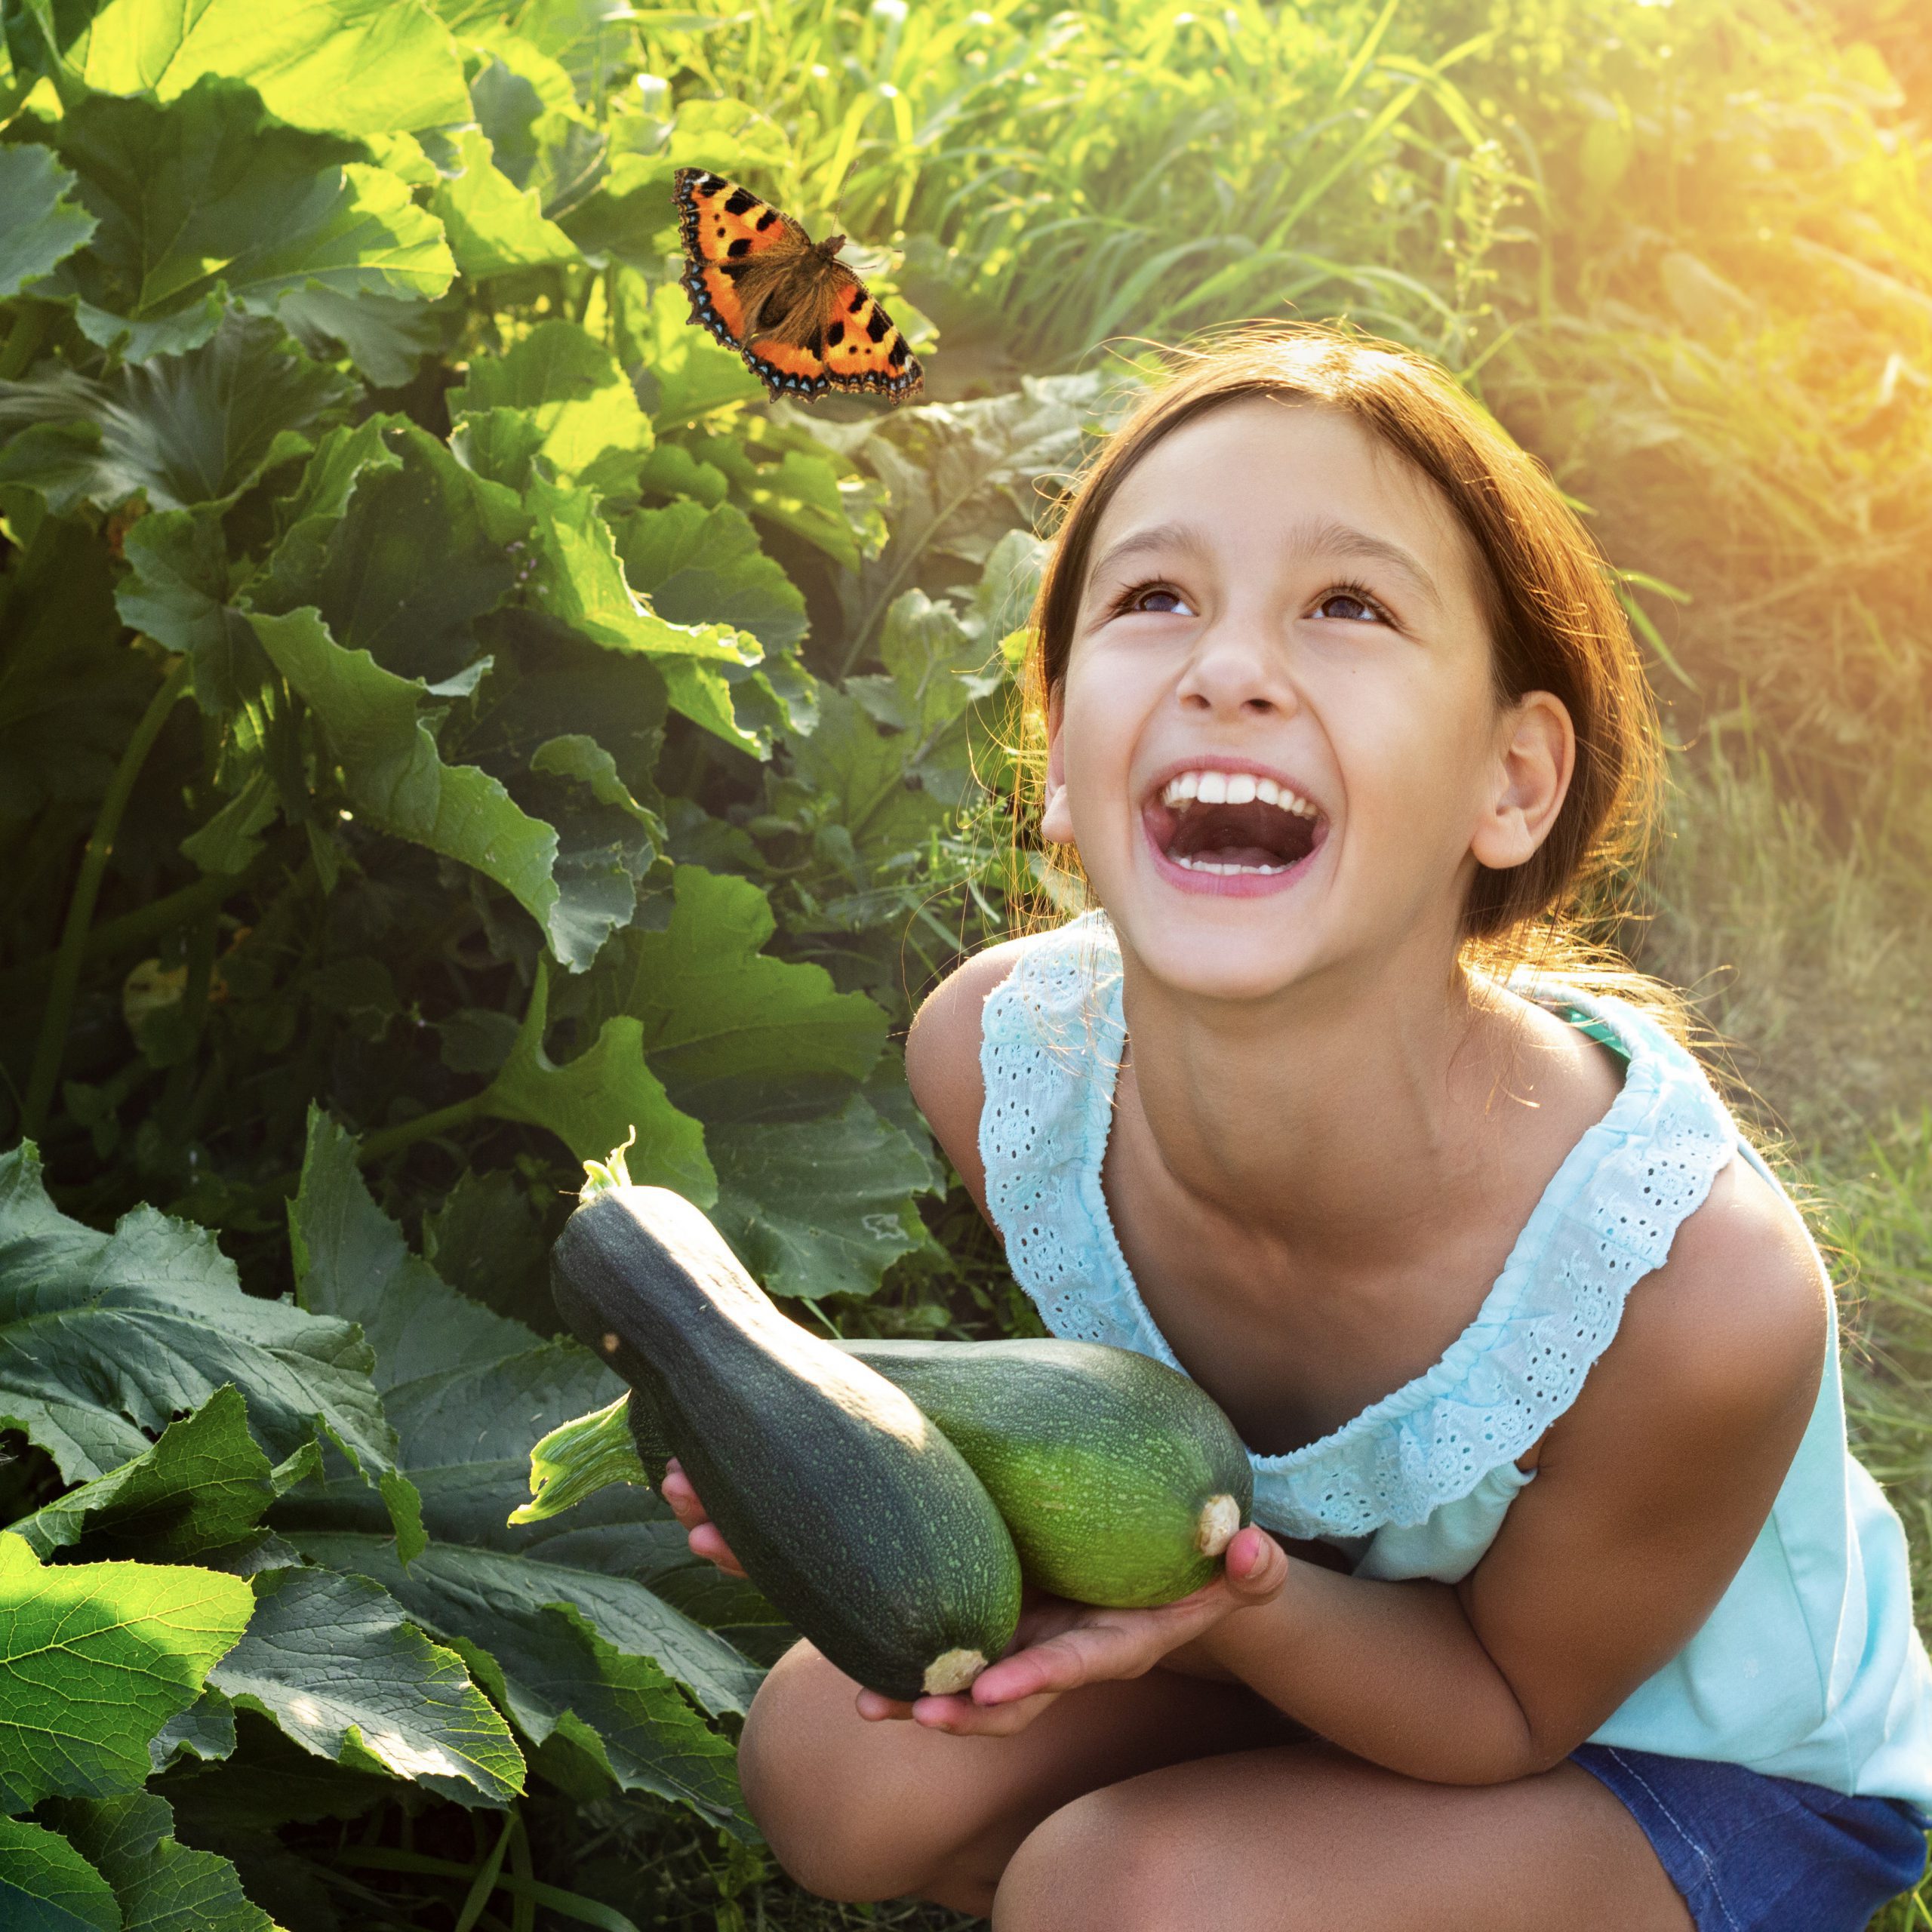 Happy laughing girl holding fresh zucchini outdoors in garden looking on flying butterfly